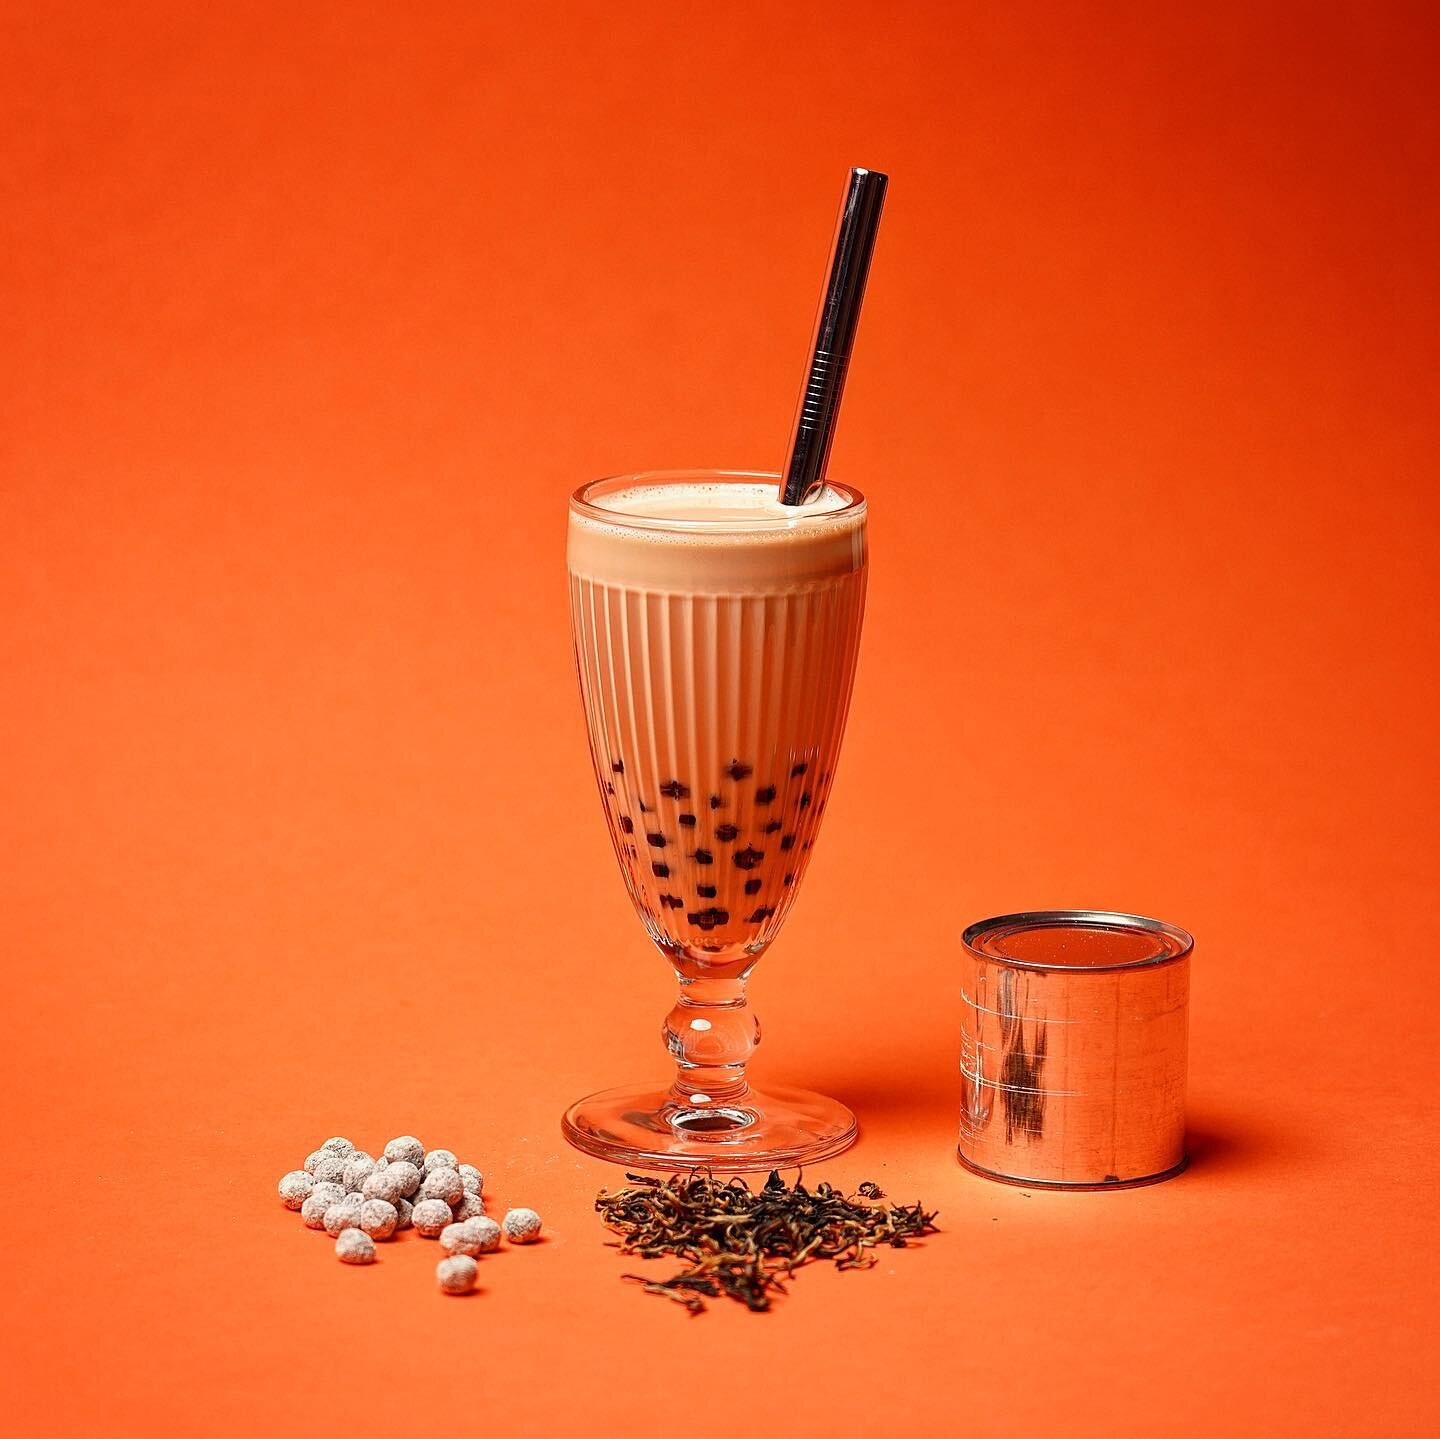 🧋The Bubble Tea Journey is finally coming to a close!🧋 What began with an unexpected moment of inspiration at Taiwan&rsquo;s famous Xing Fu Tang escalated into a weeks-long journey to crack the code to DIY bubble tea. After many ups and downs, deli